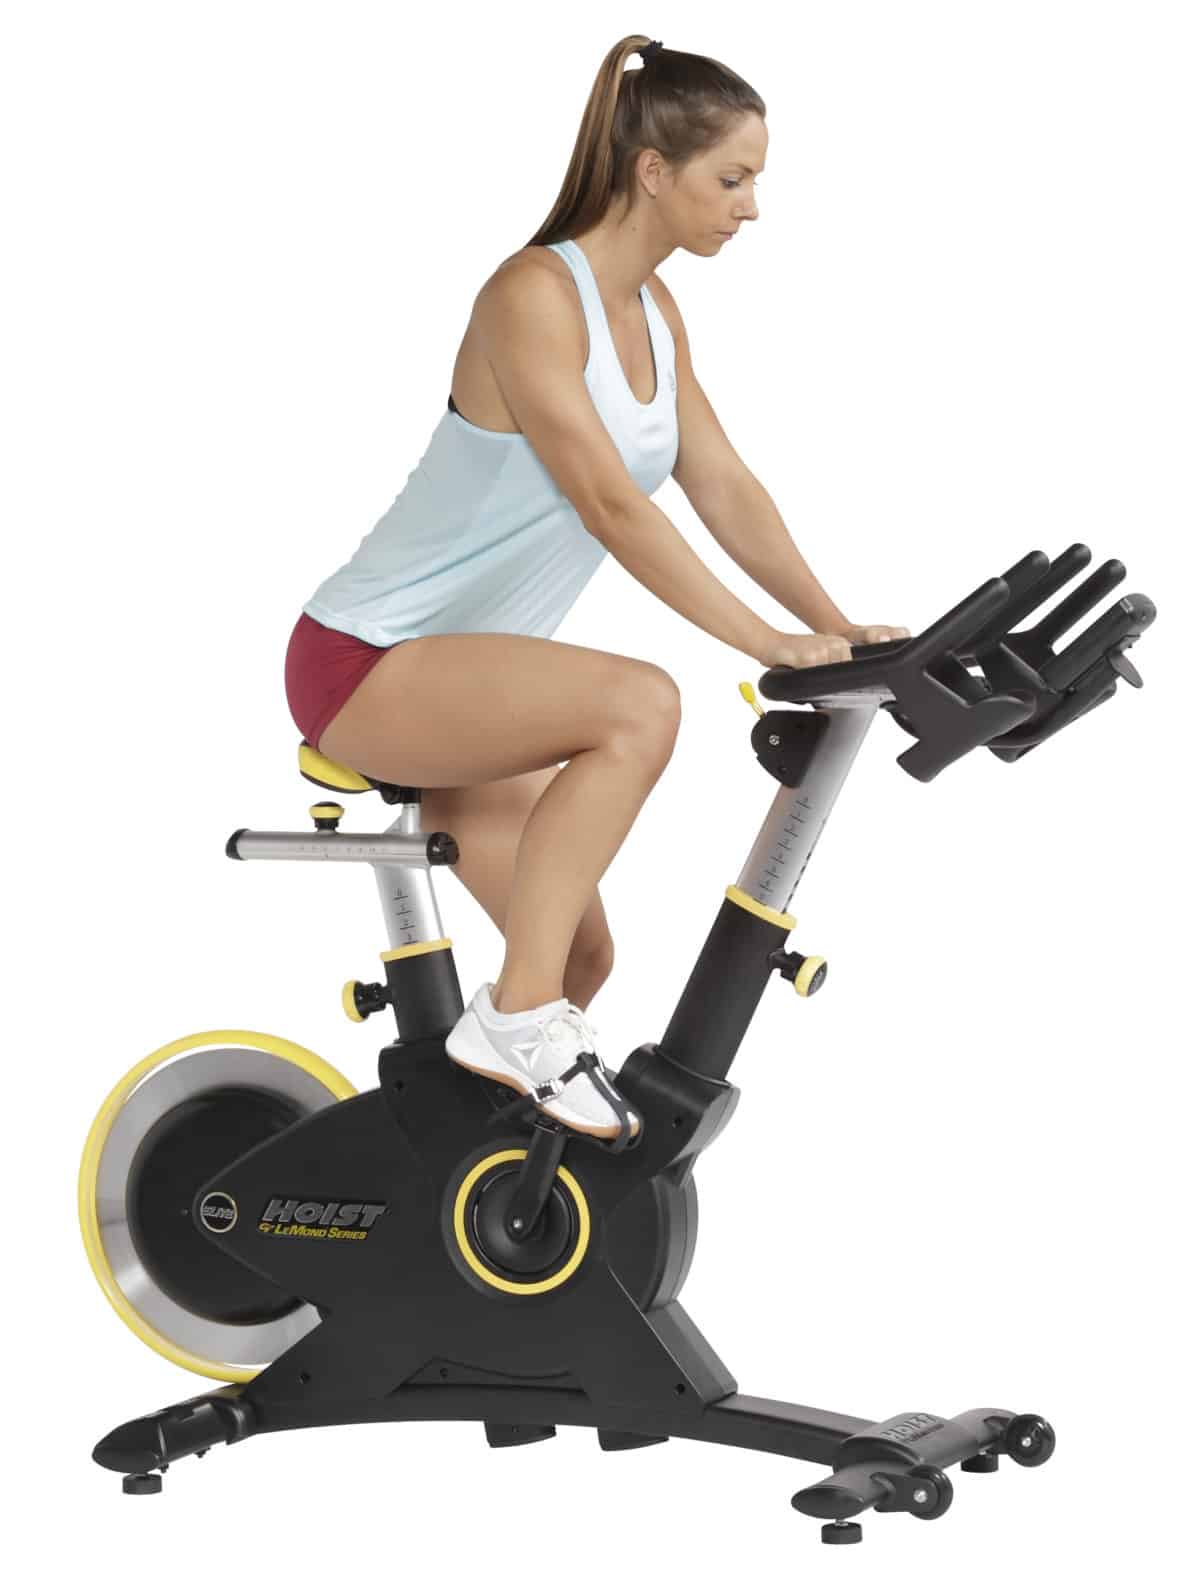 A woman is riding a stationary exercise bike